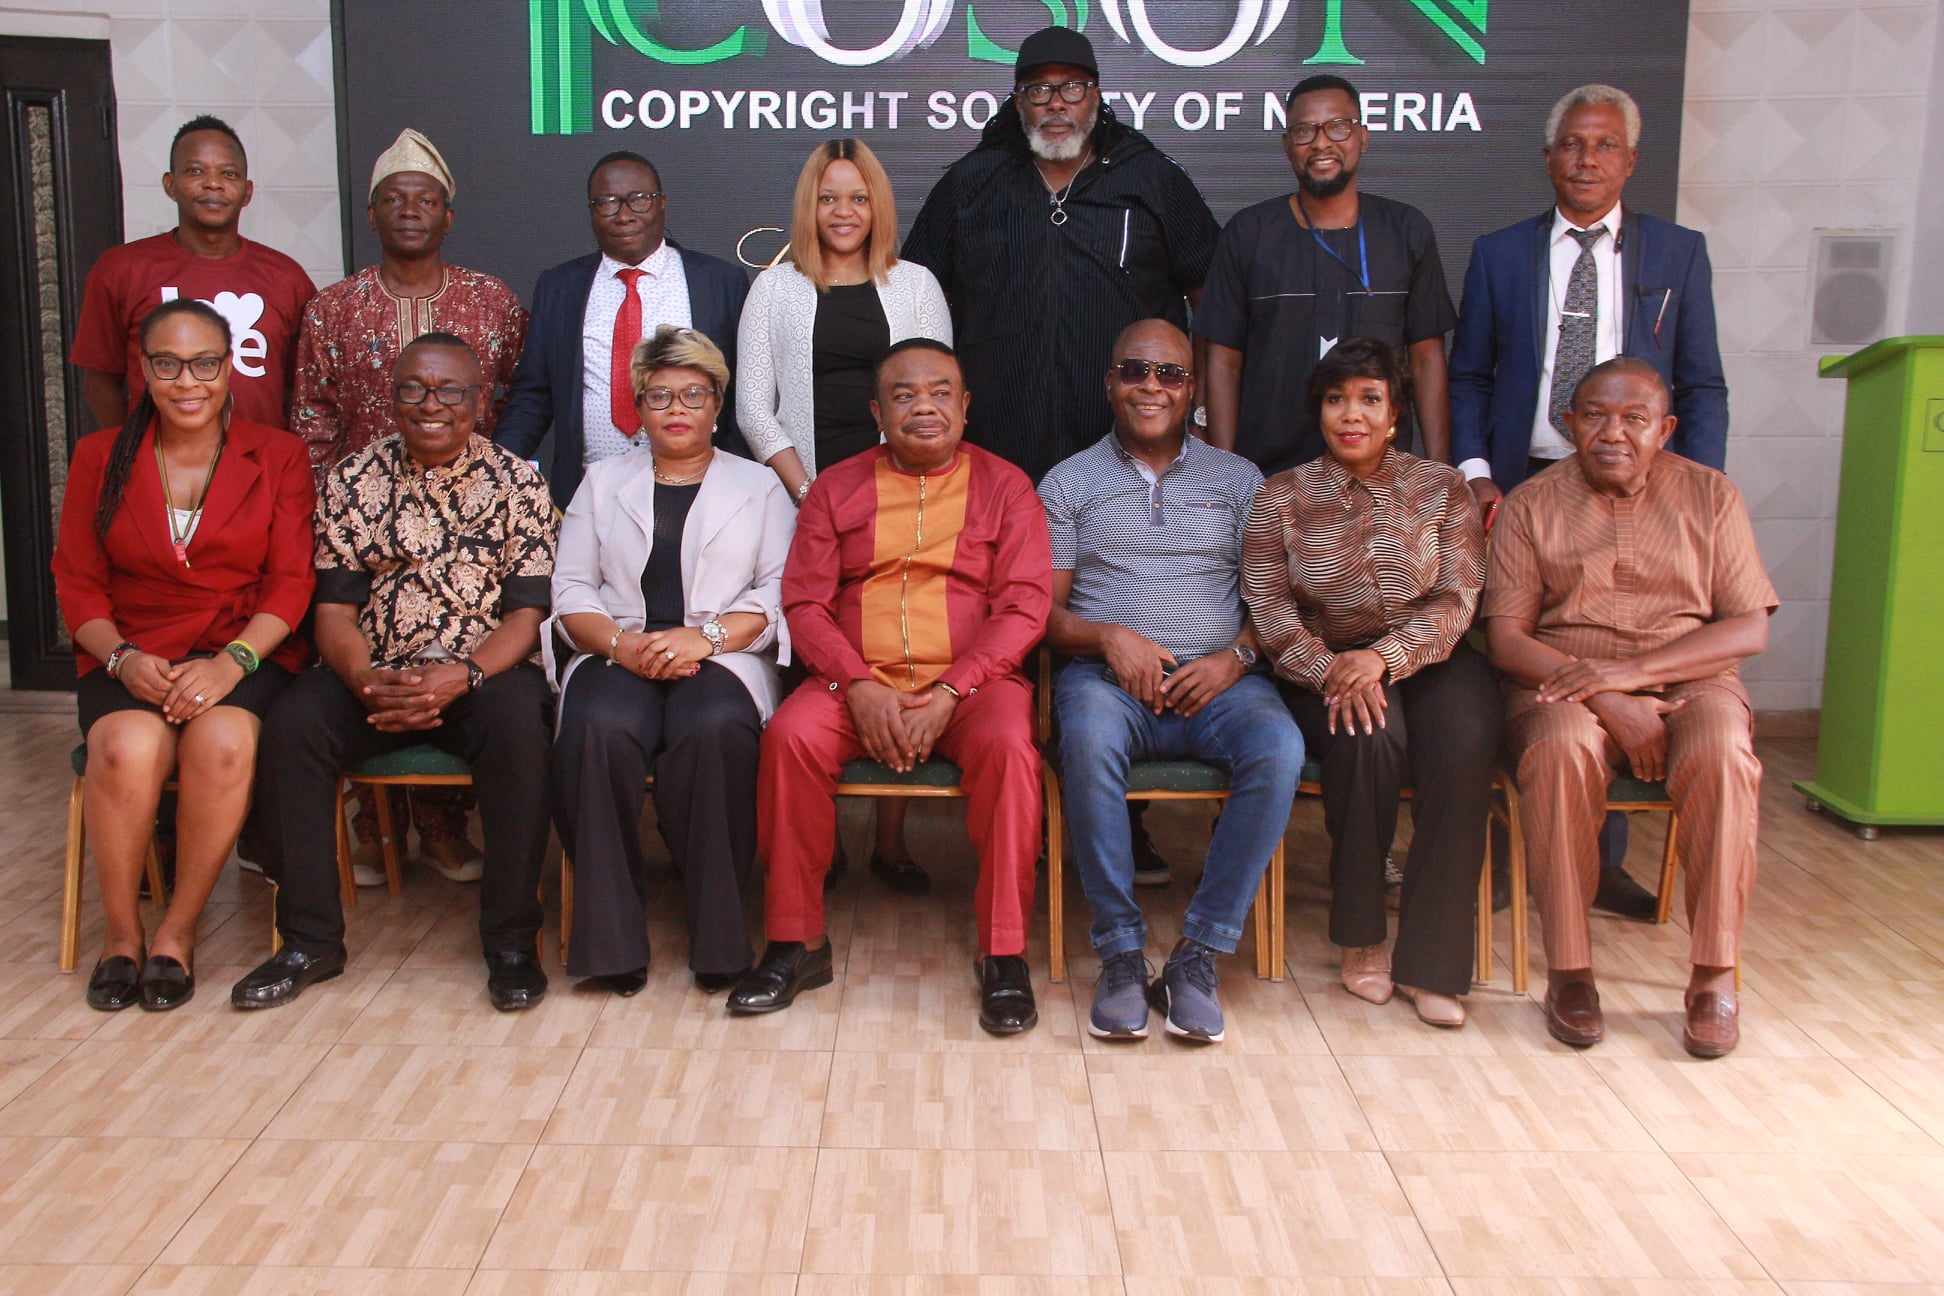 COSON BOARD MEETS IN LAGOS AND RESOLVES THAT ALL MUSIC USERS BE INFORMED THAT COSON CONTINUES TO STAND FIRM LEGALLY AND THAT THE =N=10 BILLION SUIT AGAINST THE NCC HAS NOT BEEN TRIED, STRUCK OUT, DETERMINED NOR DISMISSED AND THAT COSON RENEWS THE CALL FOR THE SACK OF NCC DG, JOHN ASEIN.